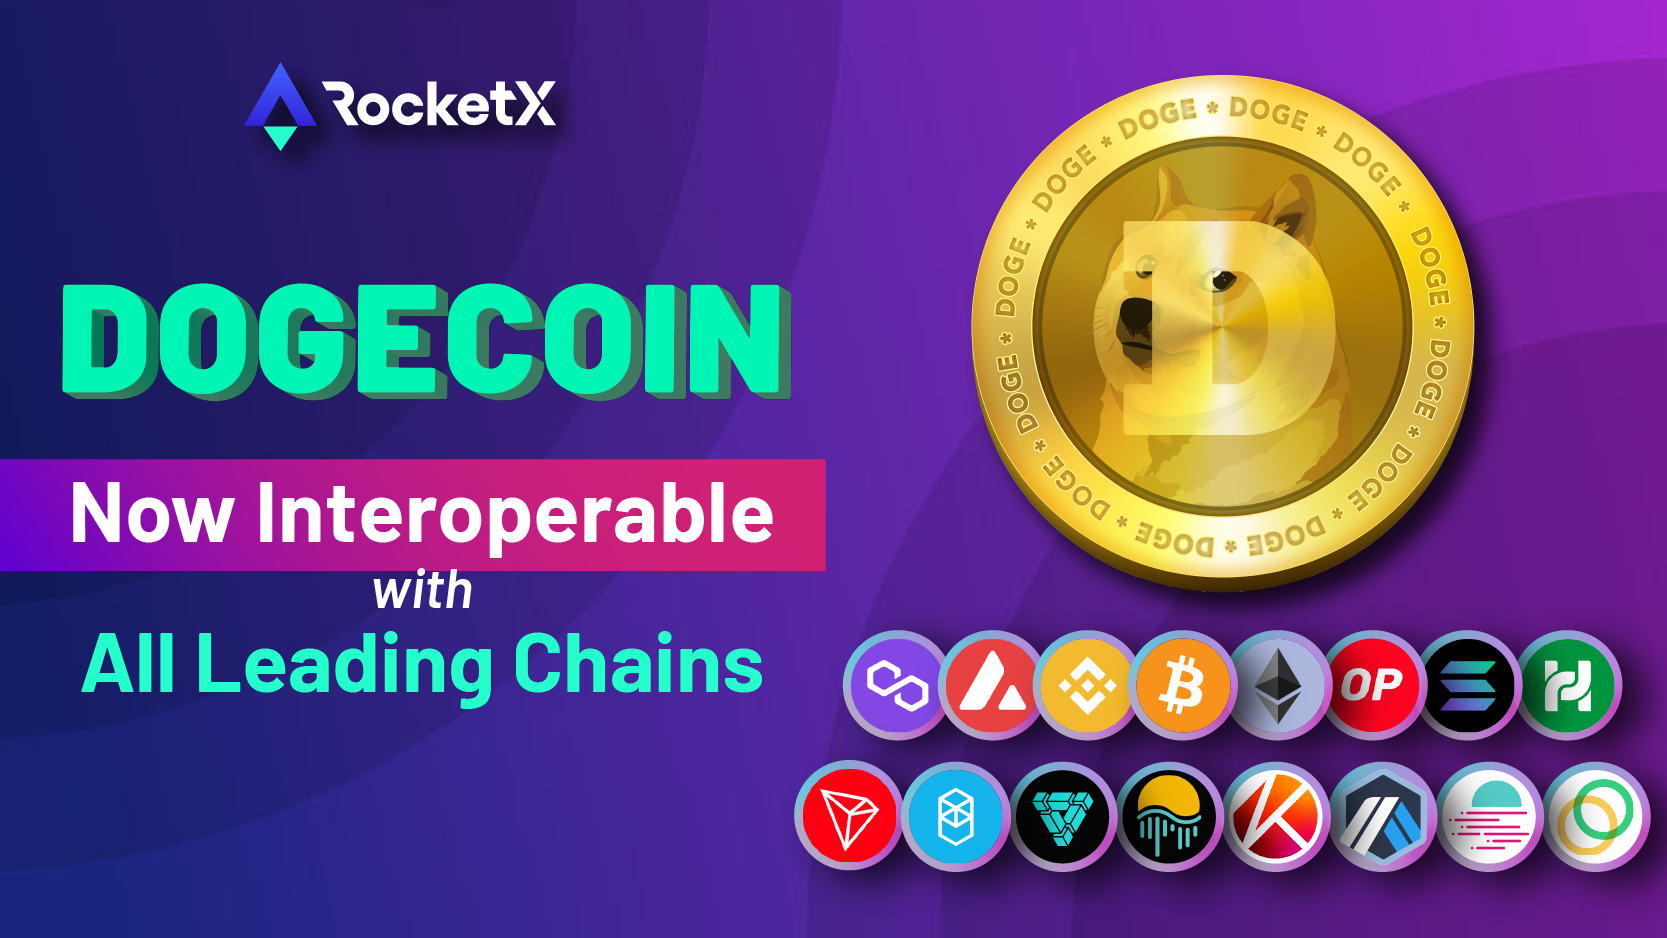 RocketX, the decentralized aggregator, integrates Dogecoin for seamless swapping with other assets. Enjoy better returns, interoperability and reduced transaction fees on the platform supporting 20+ blockchains.